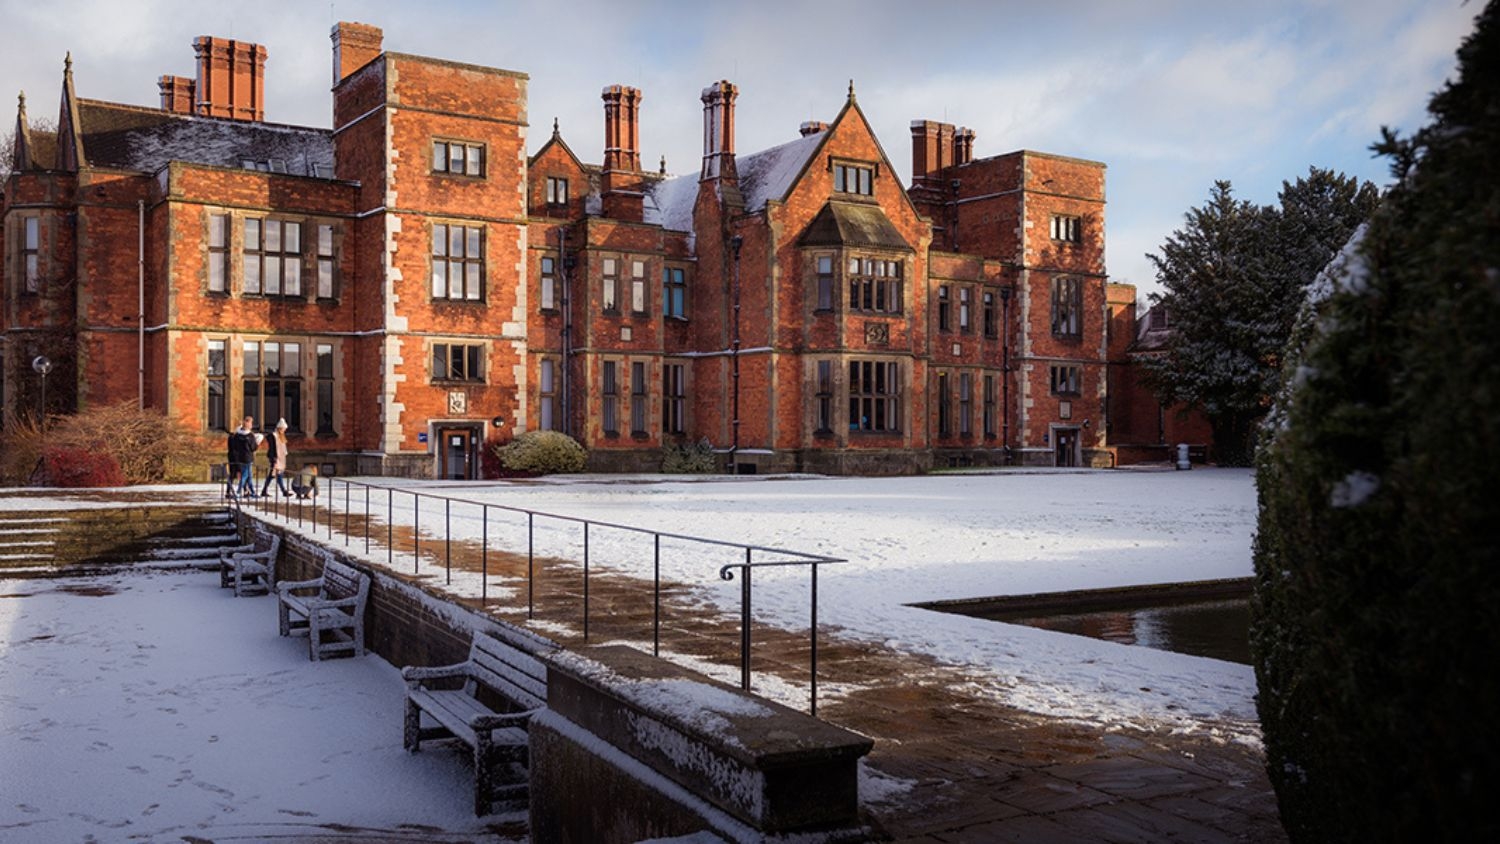 The University of York in the winter